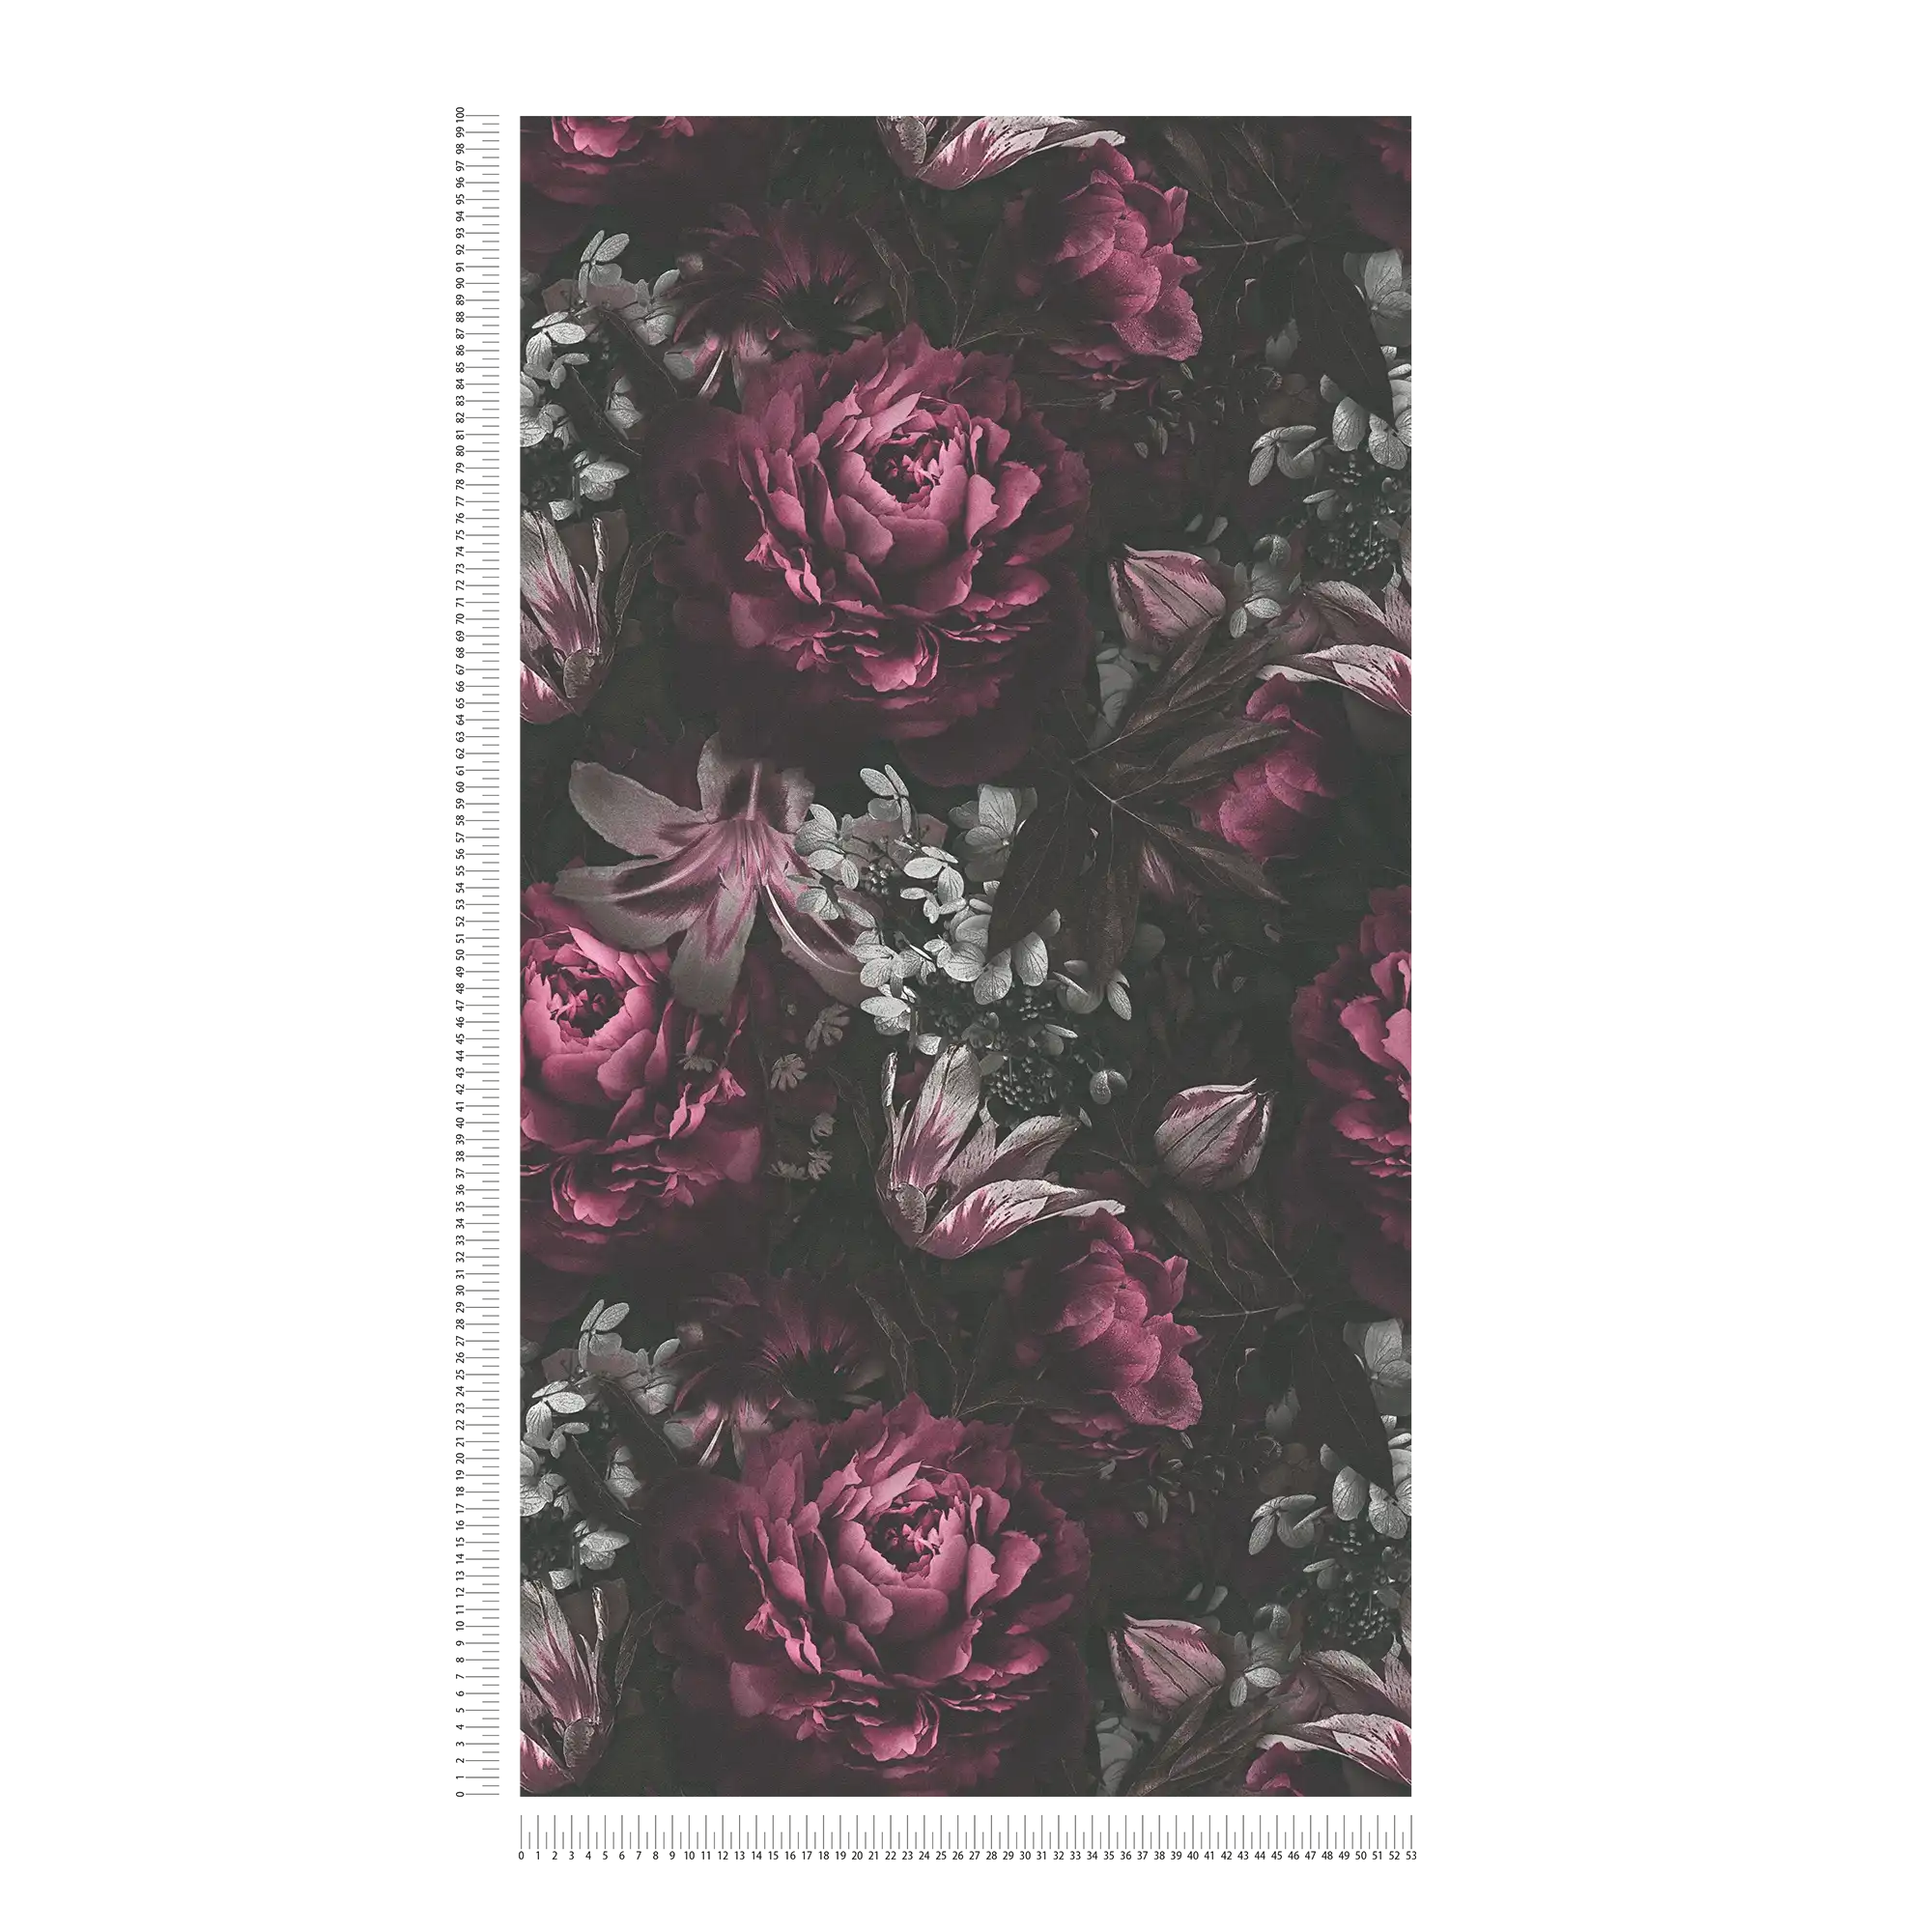             wallpaper roses & tulips in classic style - pink, grey
        